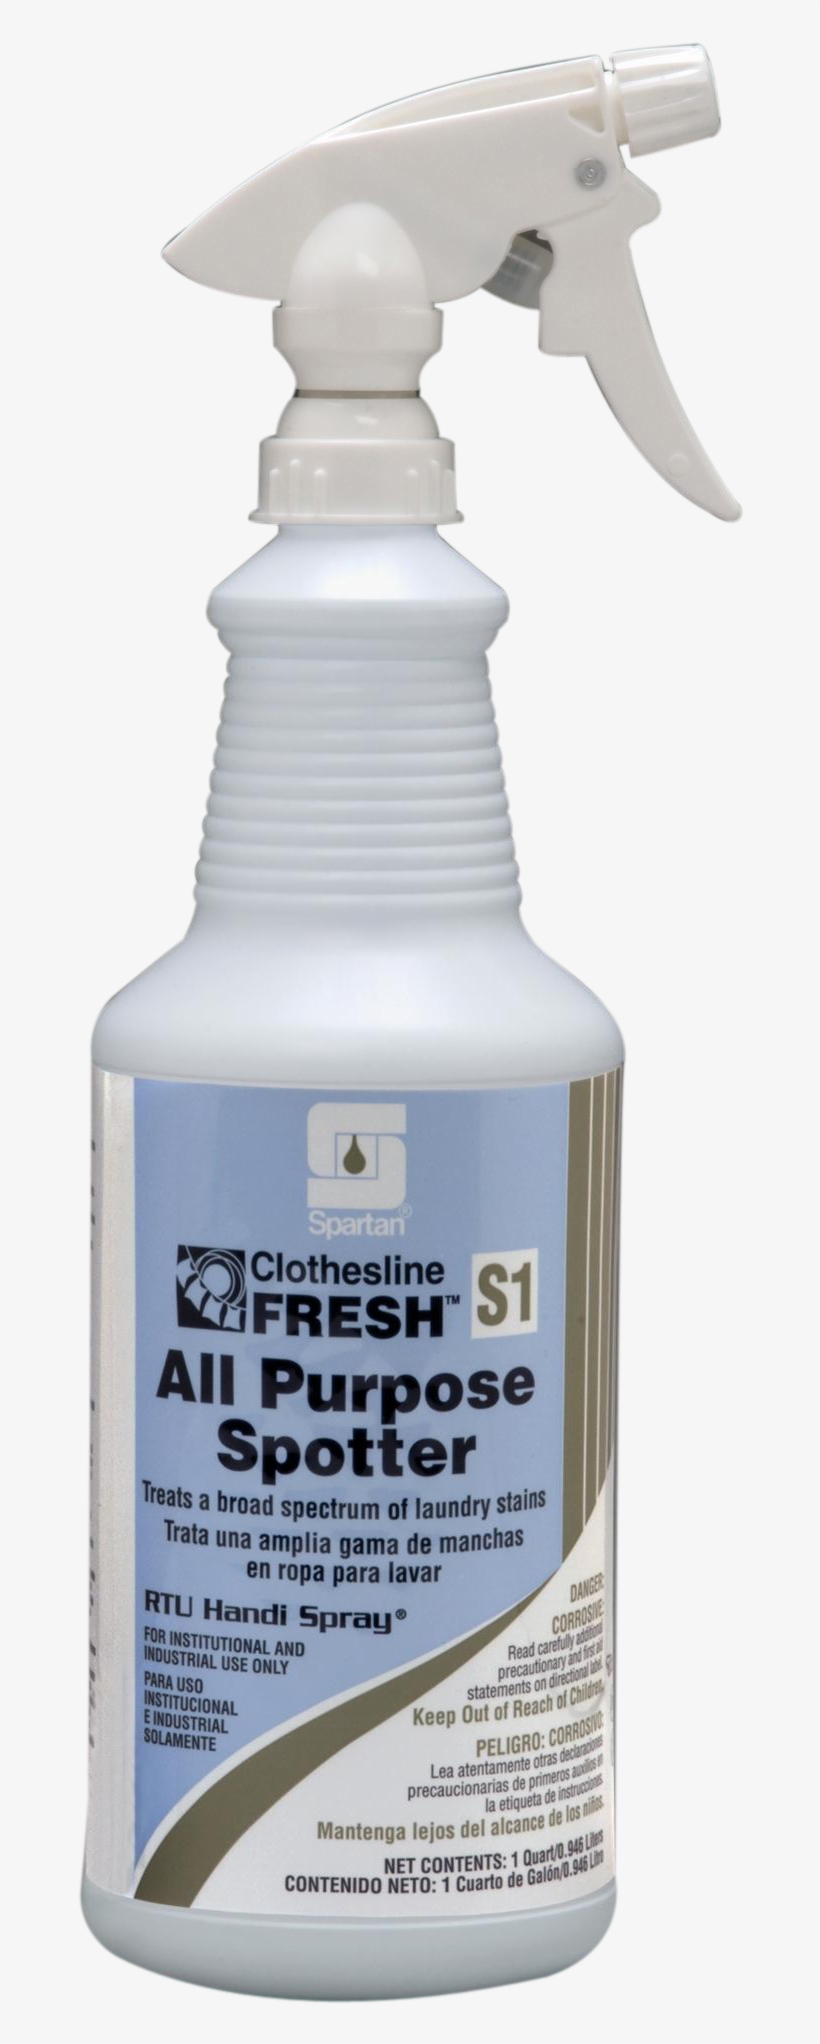 705103 Clf All Purpose Spotter - Betadine Stain Remover, transparent png #9012432